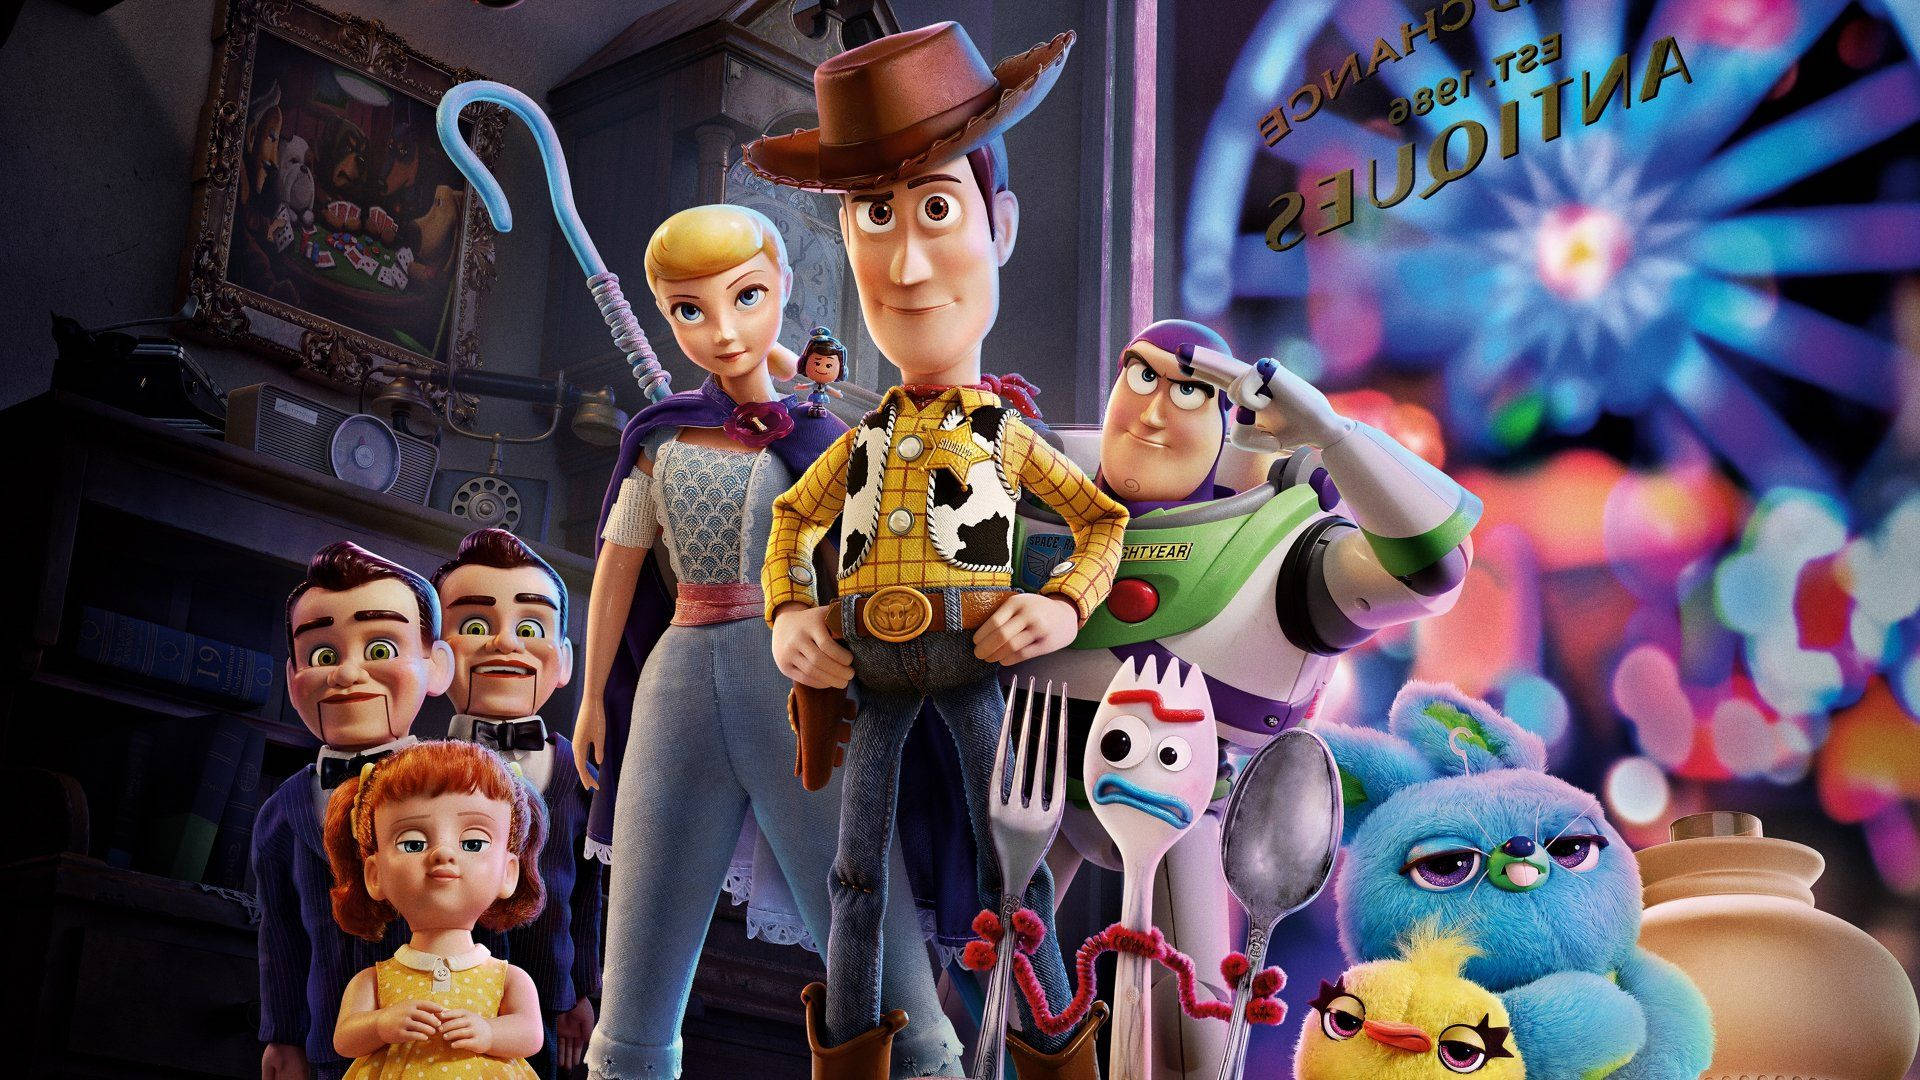 Top 999+ Toy Story 4 Wallpaper Full HD, 4K✅Free to Use